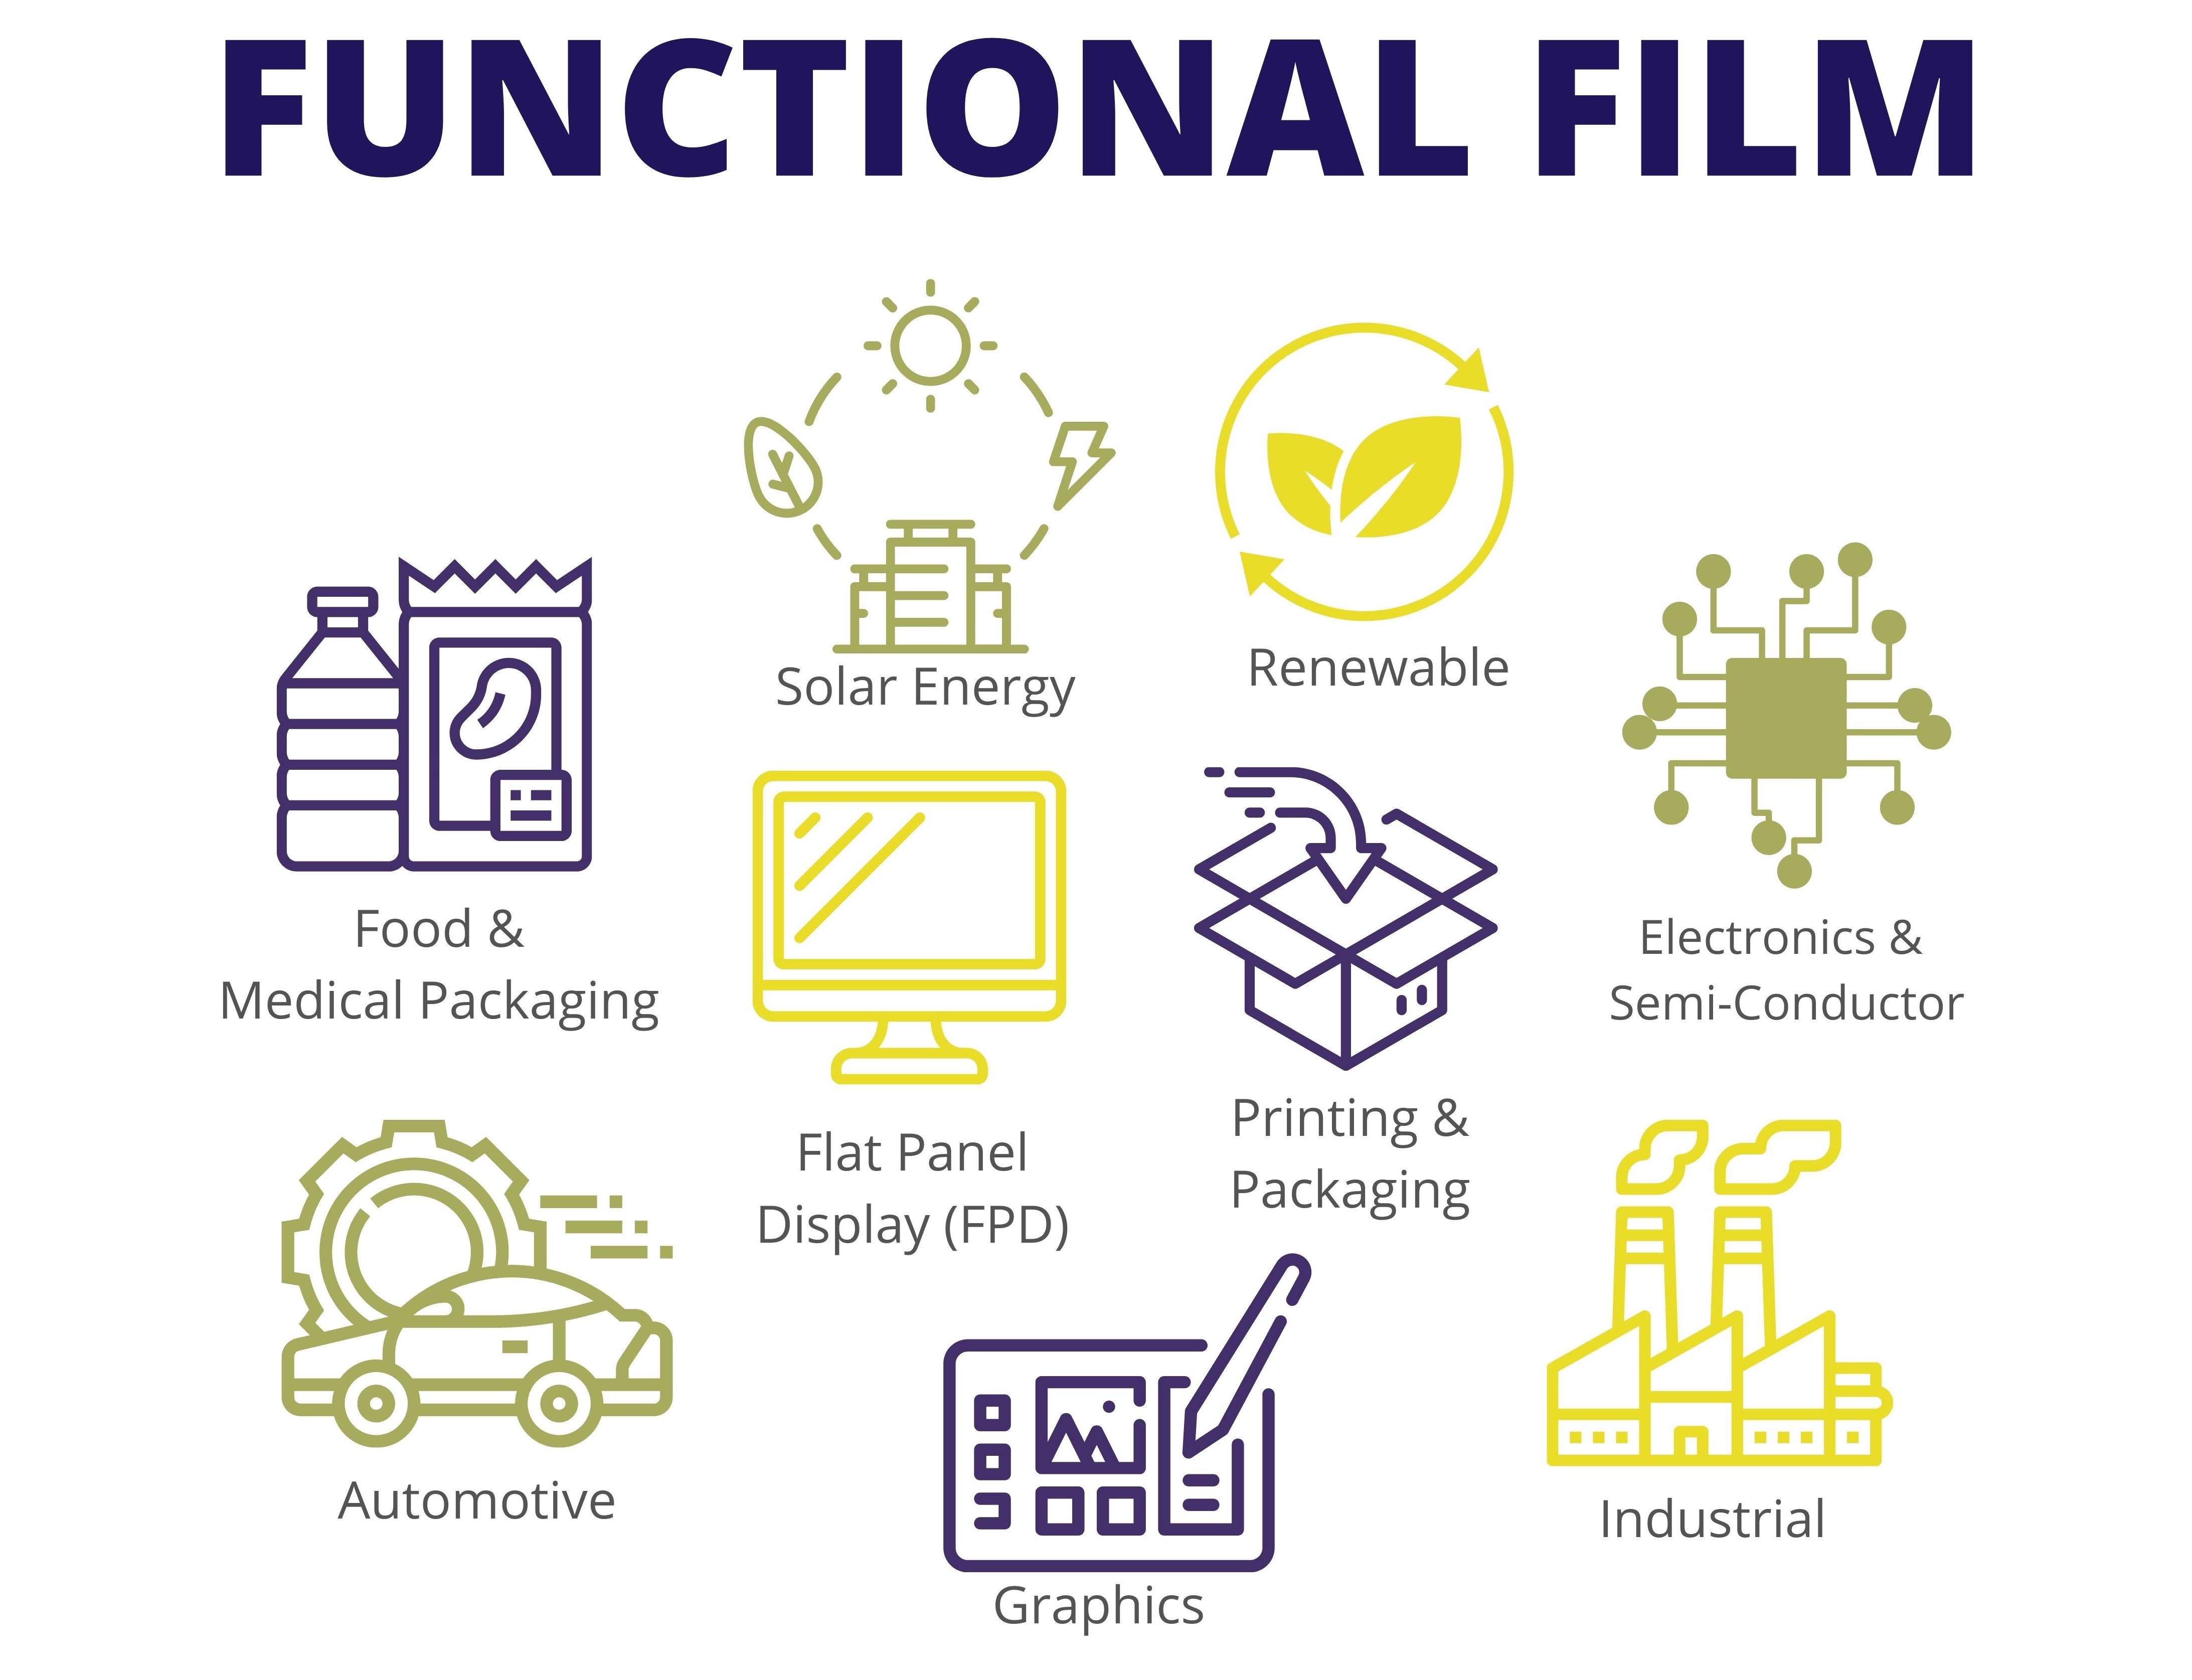 Attendees will be visiting from the following end user groups for functional film. Food & Medical Packaging, Solar energy, renewable, electronics & semi-conductors, flat panel display (FPD), printing & packaging, automotive, graphics and industrial